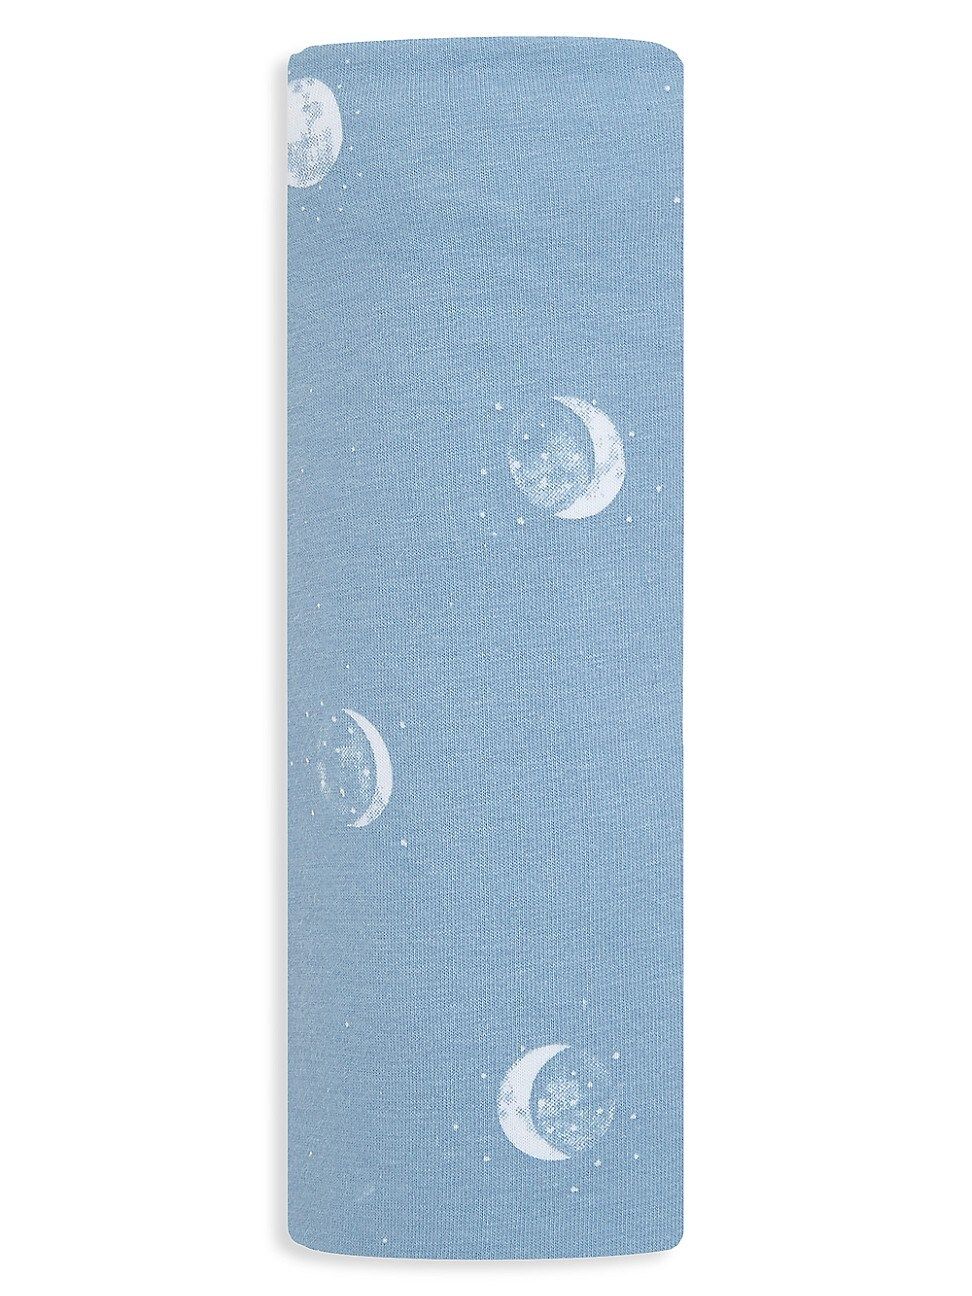 aden + anais Baby's Muslin Printed Swaddle Blanket - Blue | Saks Fifth Avenue